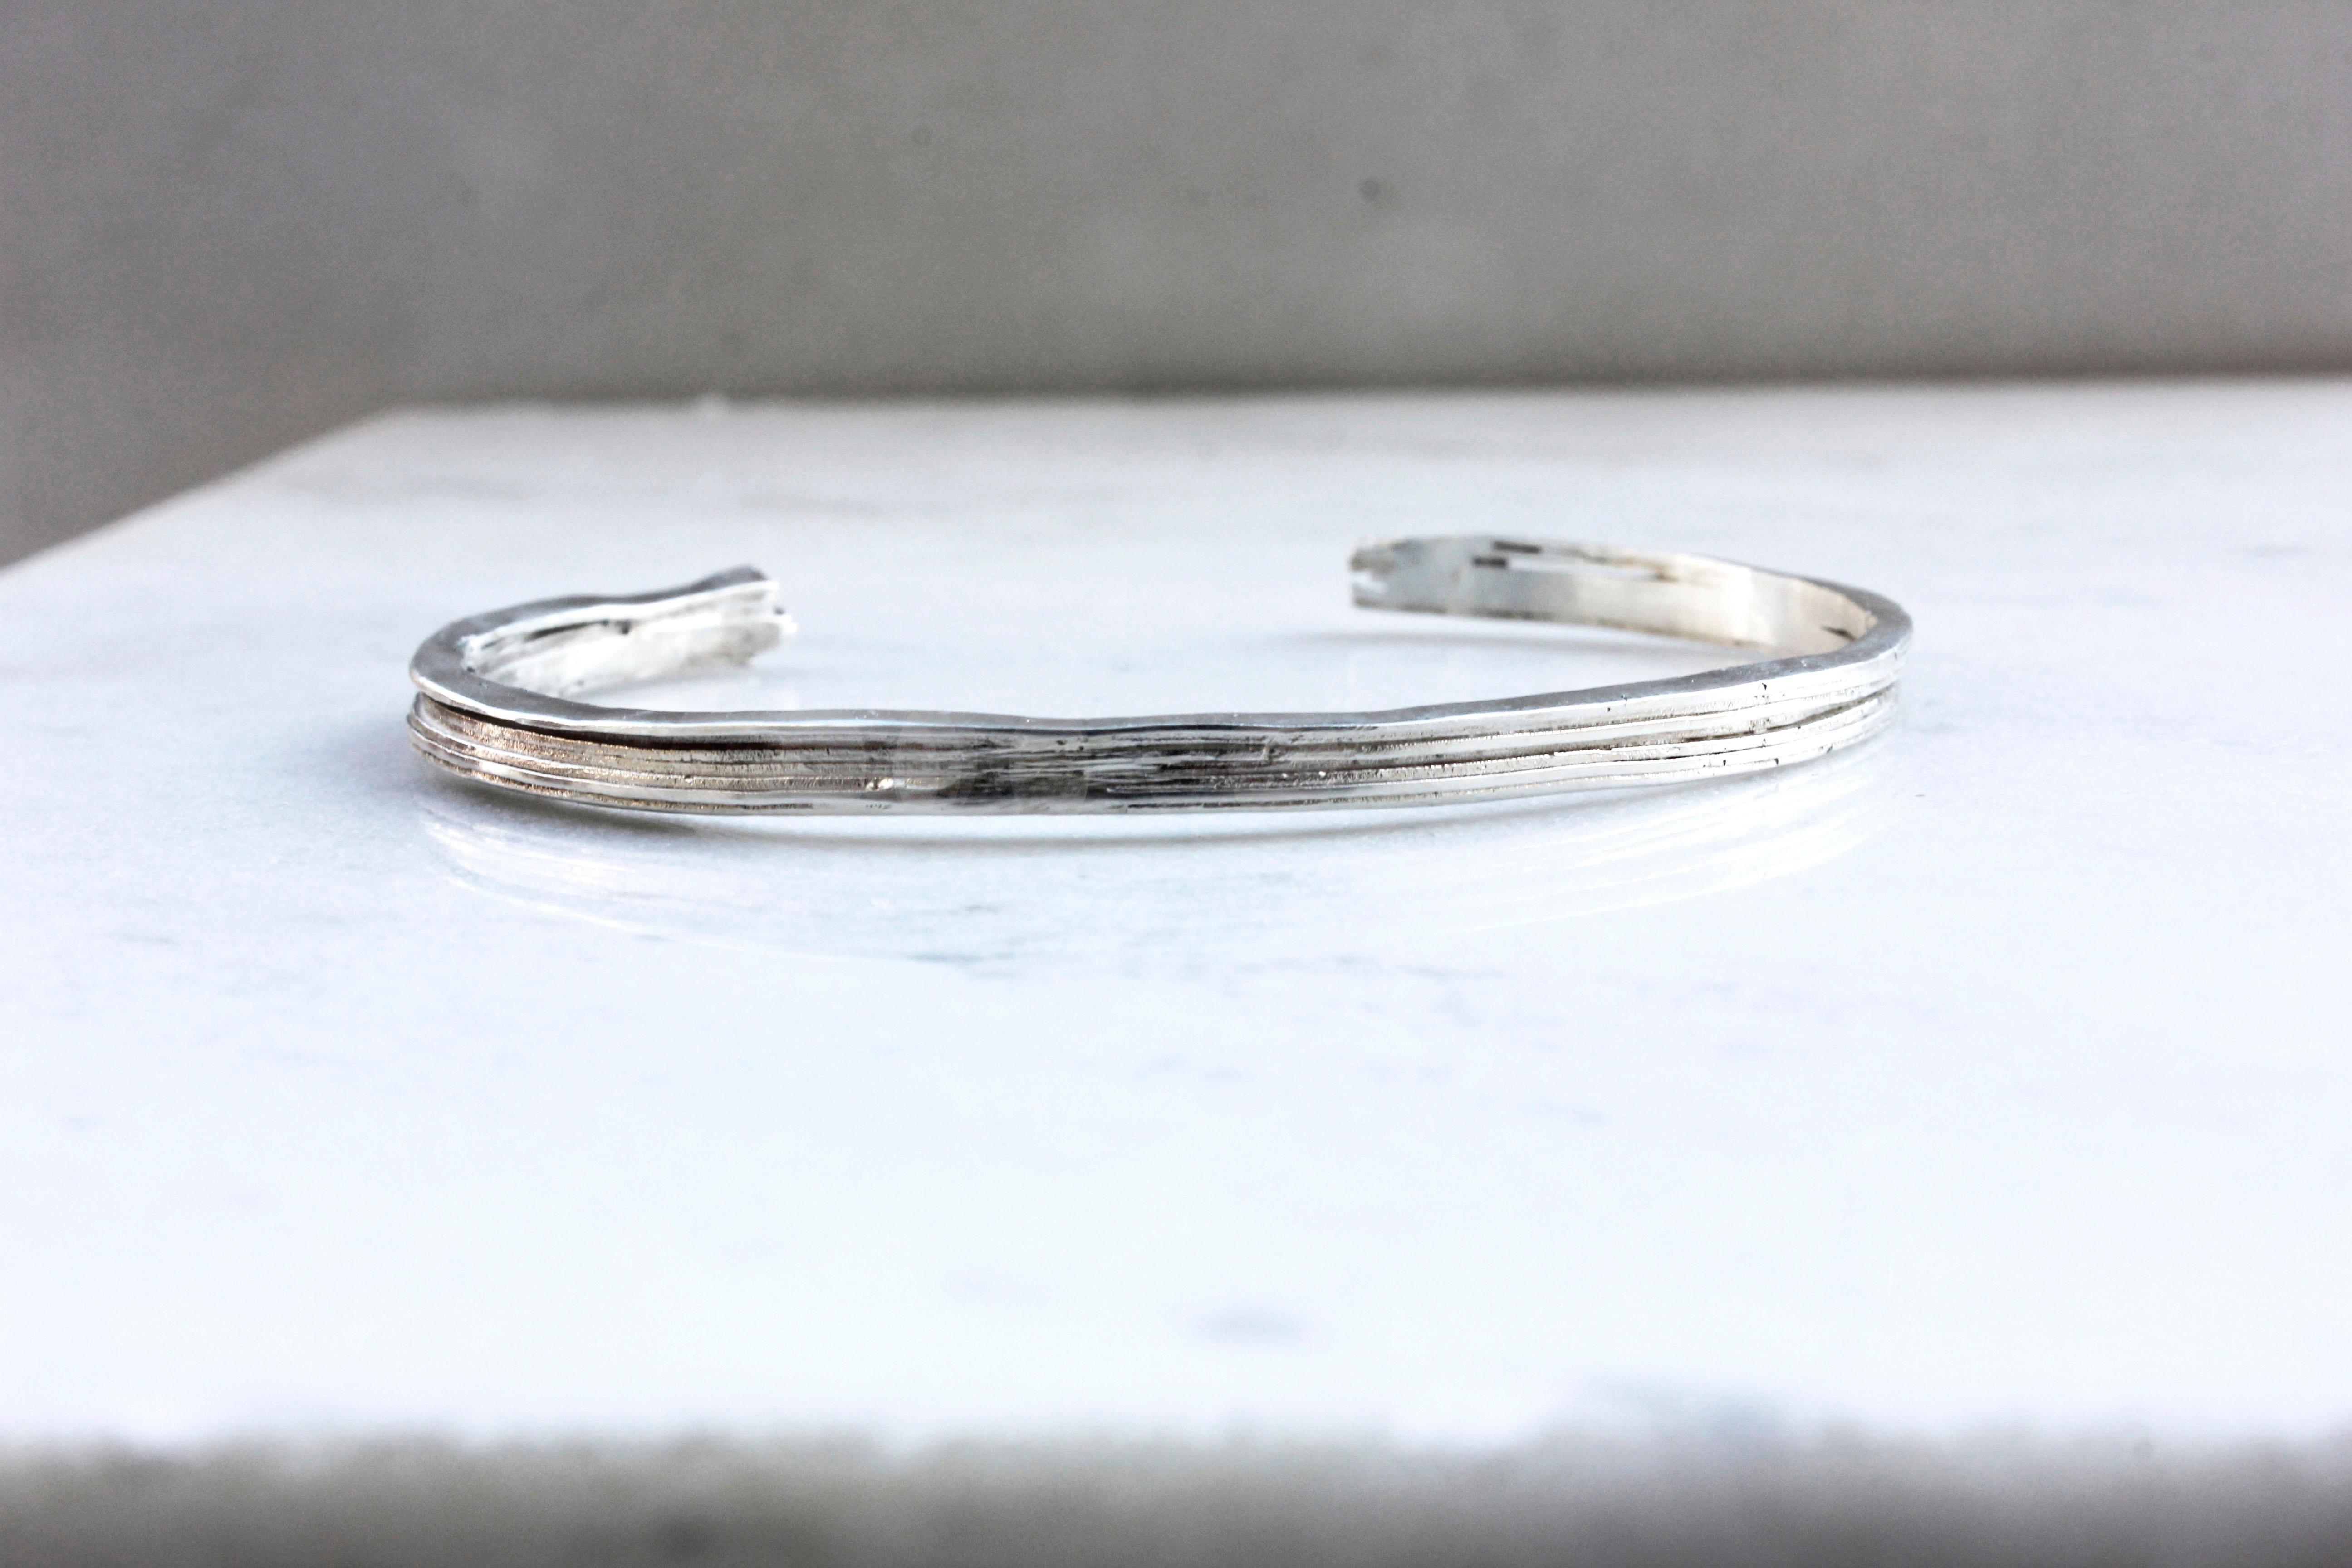 Made from eco silver sheets soldered together to create this unique texture of layers.

The bracelet is part of project_x, a collection inspired by the electronic music era.

